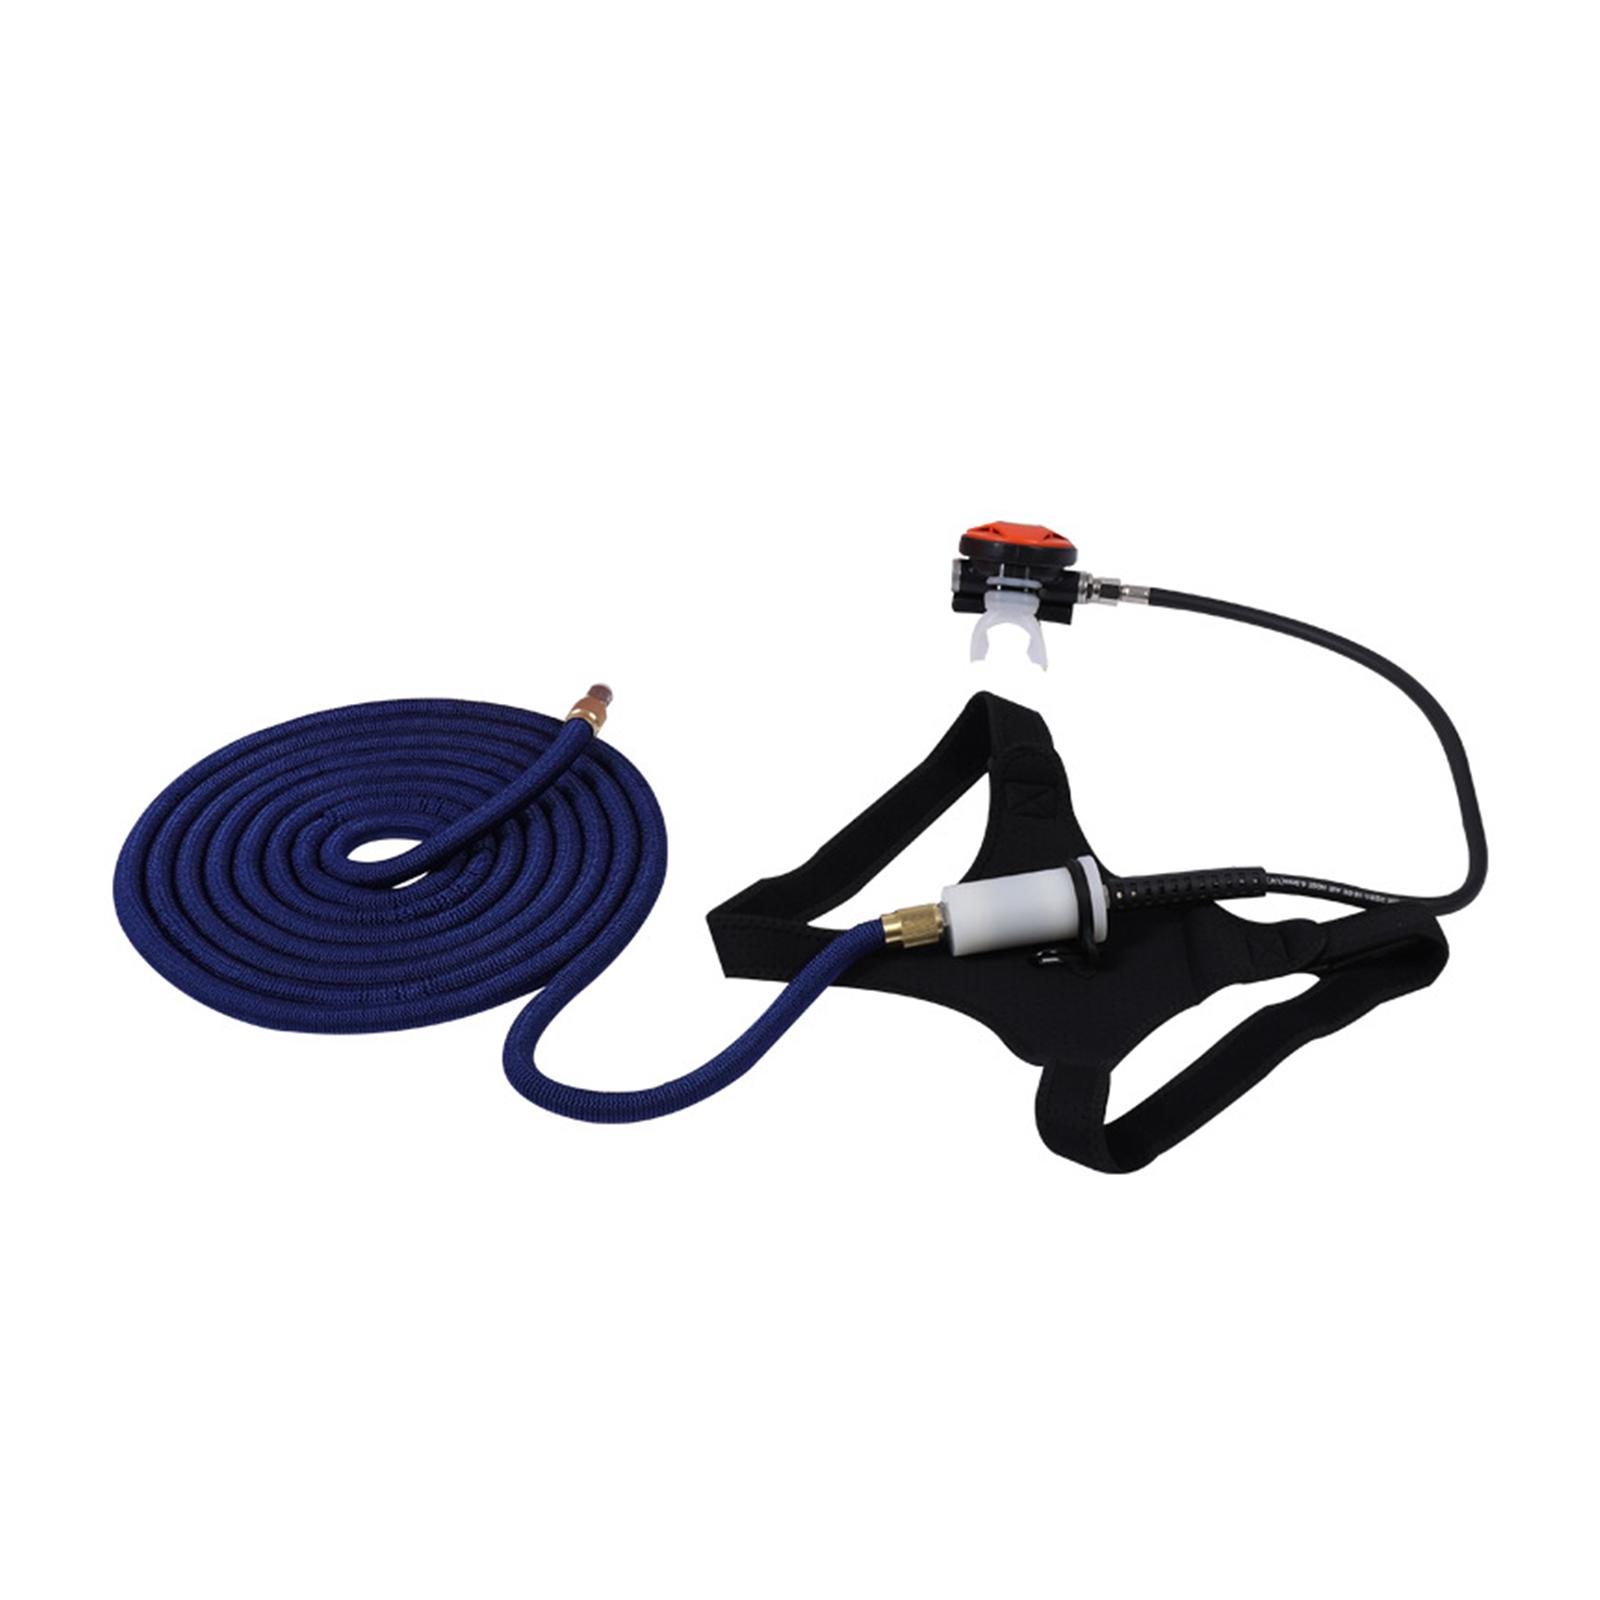 Submersible Medium Pressure Hose Practical Durable for Underwater Production Areas